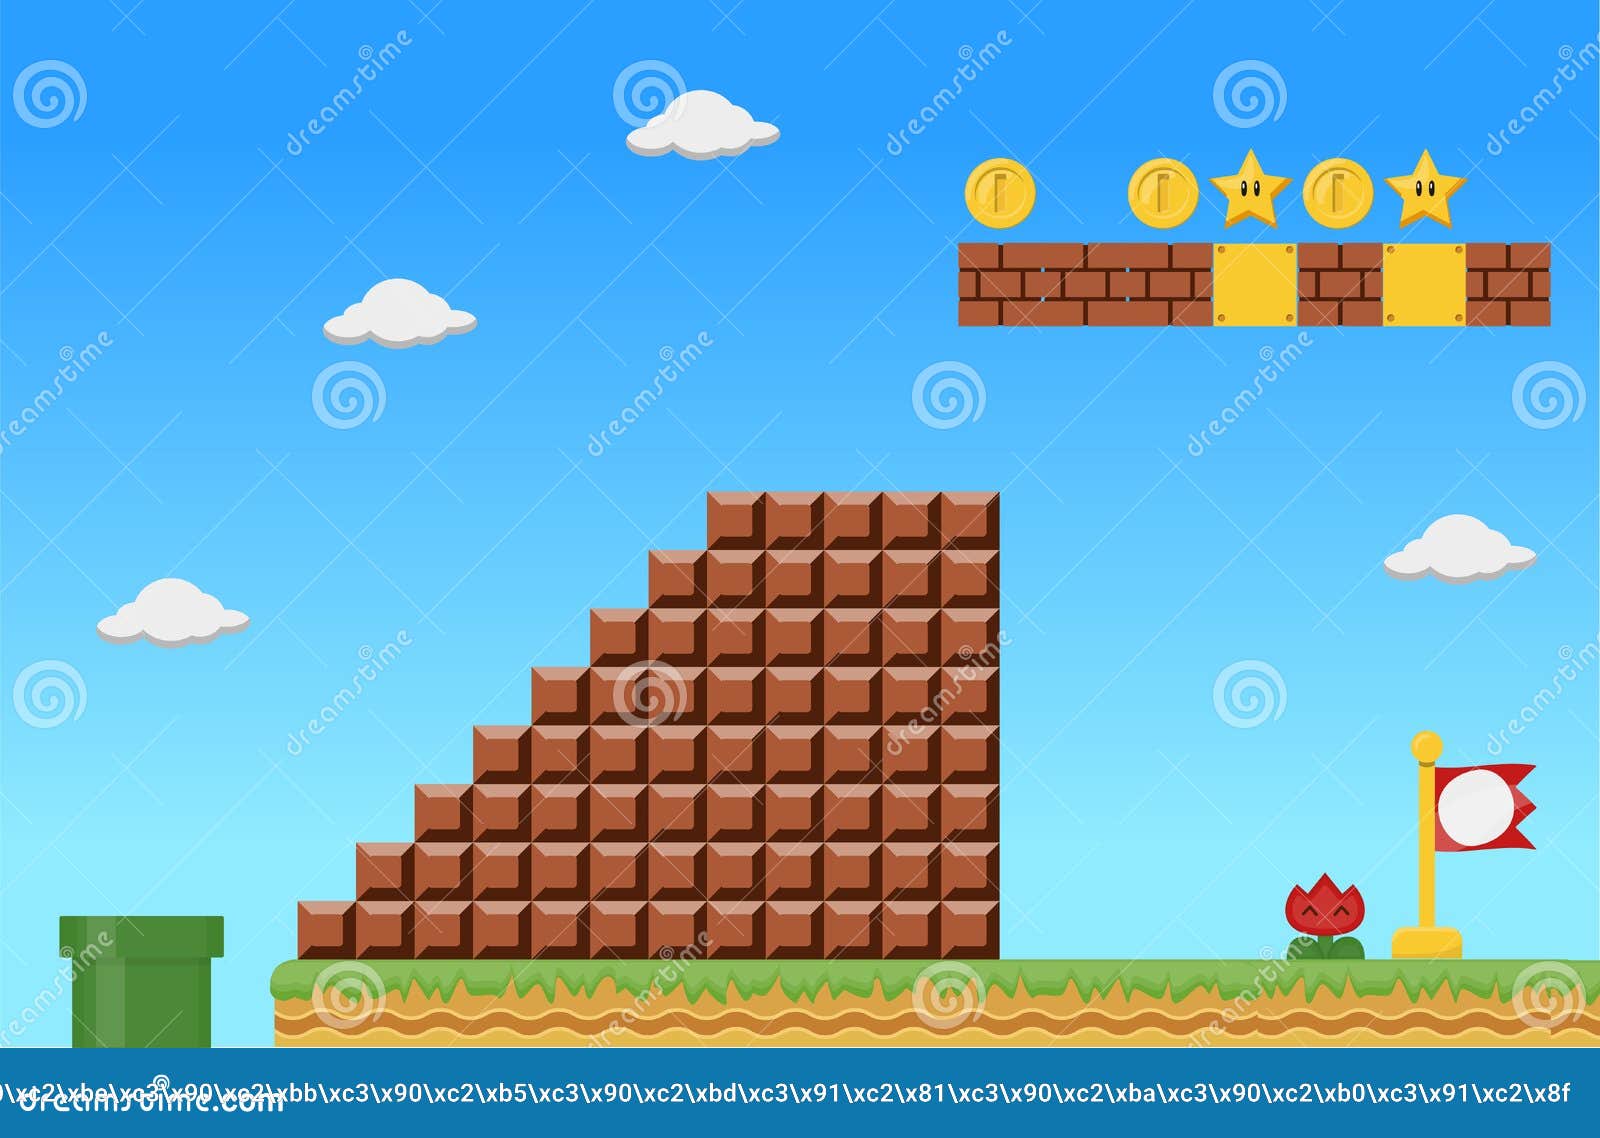 Cartoon Game Background  Seamless Background For Games Mobile Applications  And Computers Vector Illustration For Your Design Royalty Free SVG  Cliparts Vectors And Stock Illustration Image 78544920